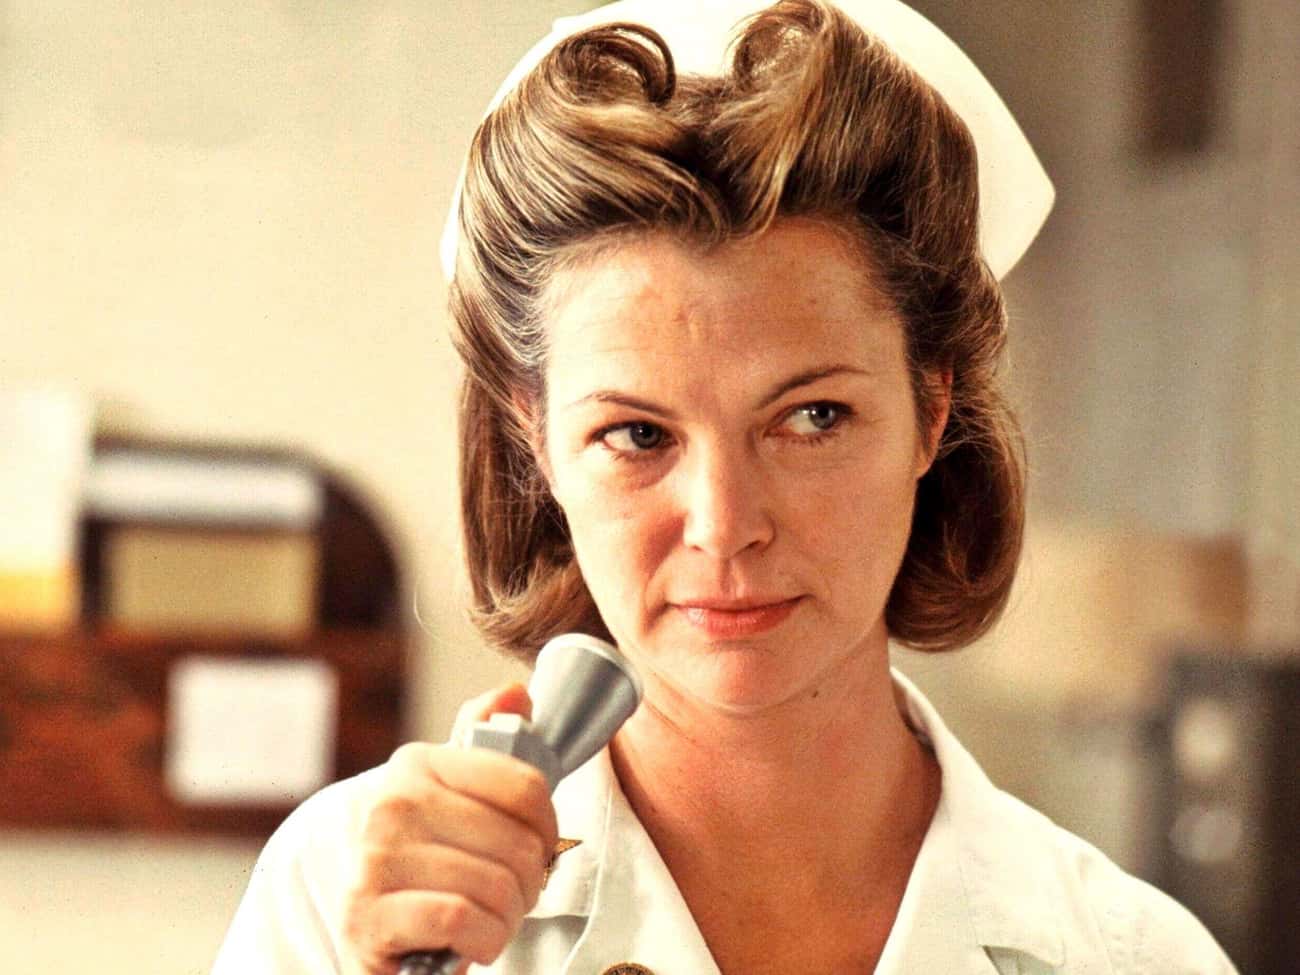 Nurse Ratched, 'One Flew Over the Cuckoo's Nest'